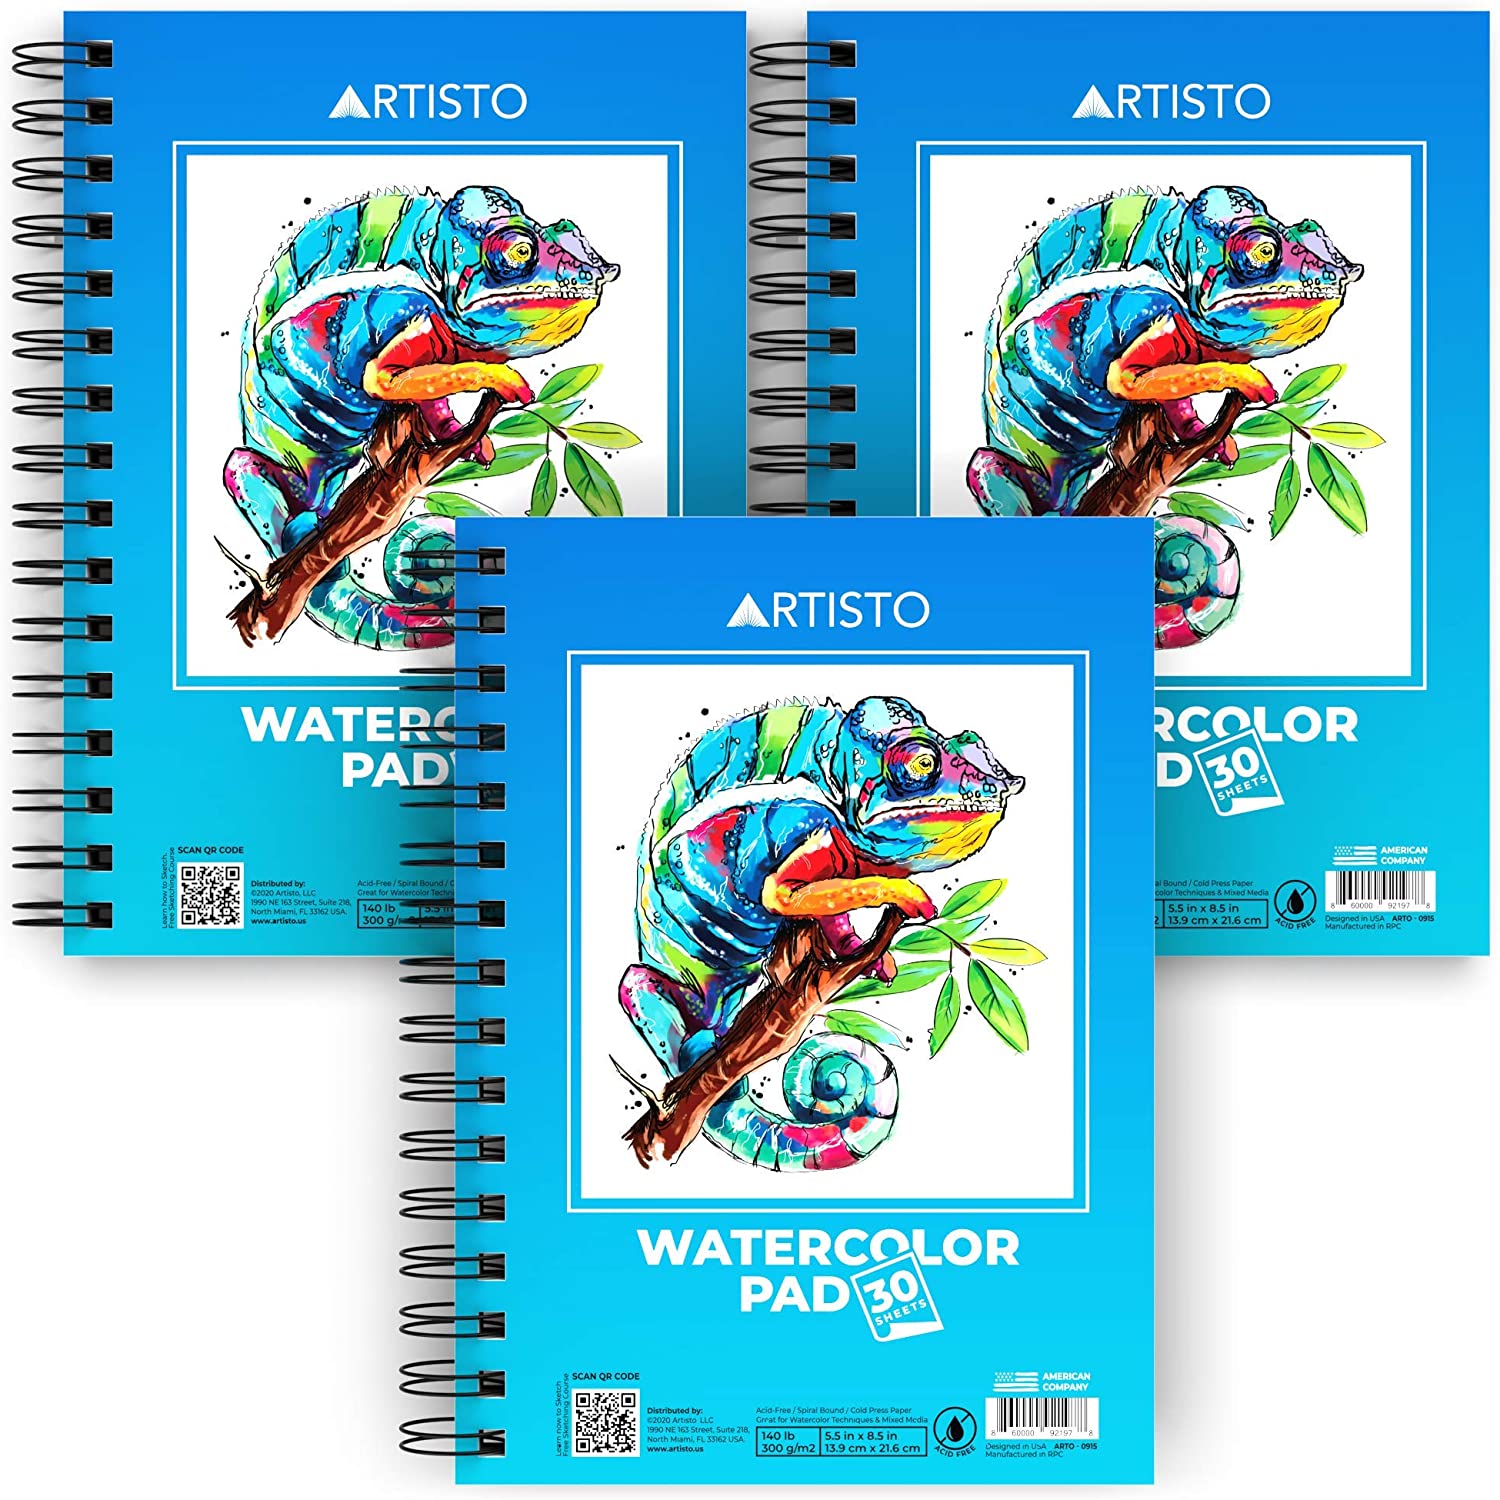 Artisto Watercolor Pads 9x12”, Pack of 2 (60 Sheets), Glue Bound, Acid-Free Paper, 140lb (300gsm), Perfect for Most Wet & Dry Media, Ideal for